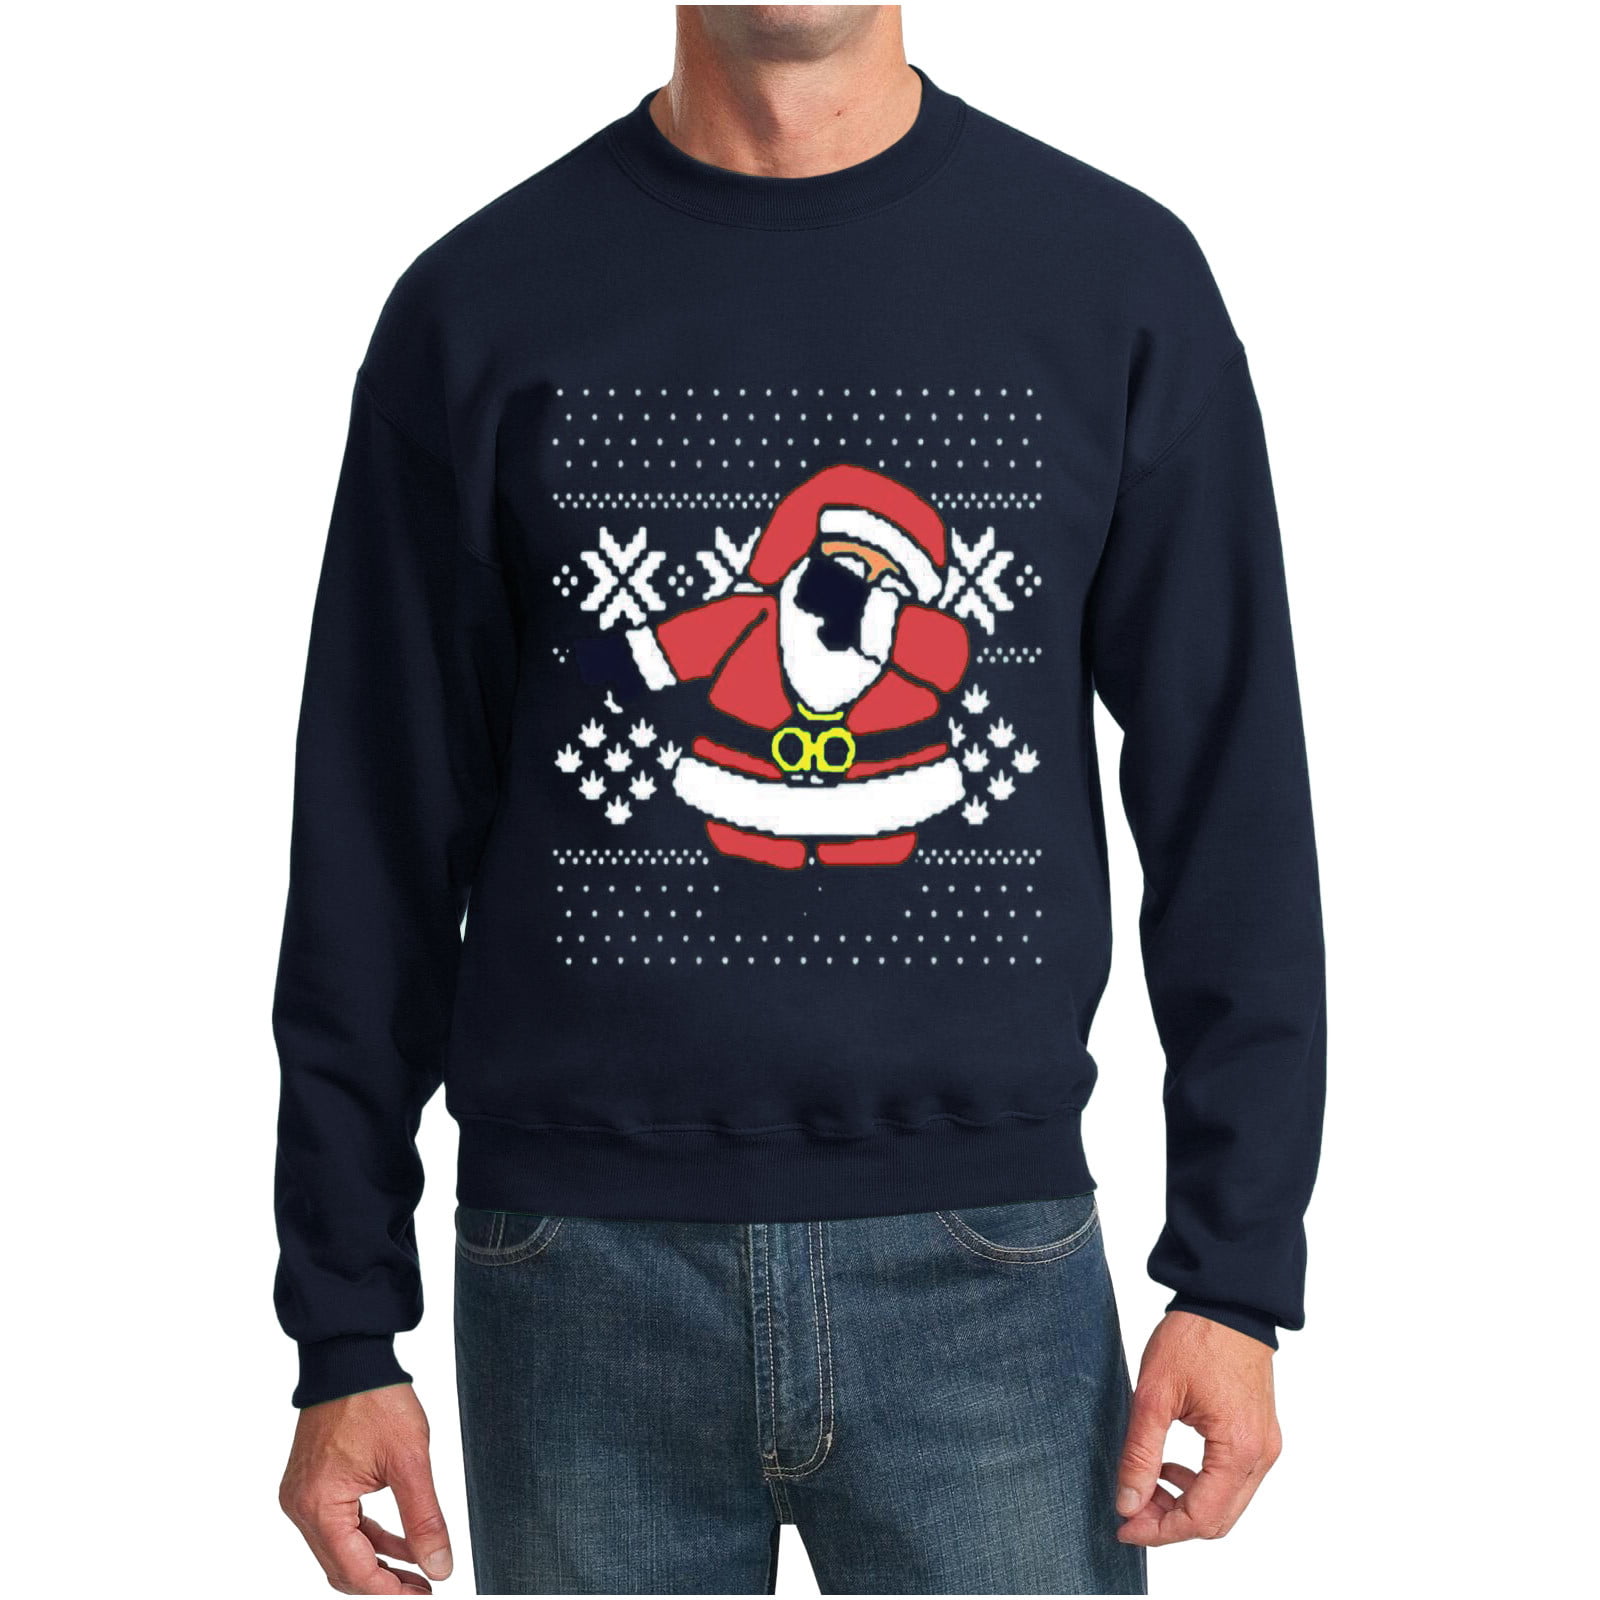 VONCOS Men's Loose Round Neck Men's Solid Color Shirt Is A Popular Christmas Sweater For Foreign Trade, Which Is Made Of Dabbing Santa Claus Crewneck Sweatshirt - Walmart.com